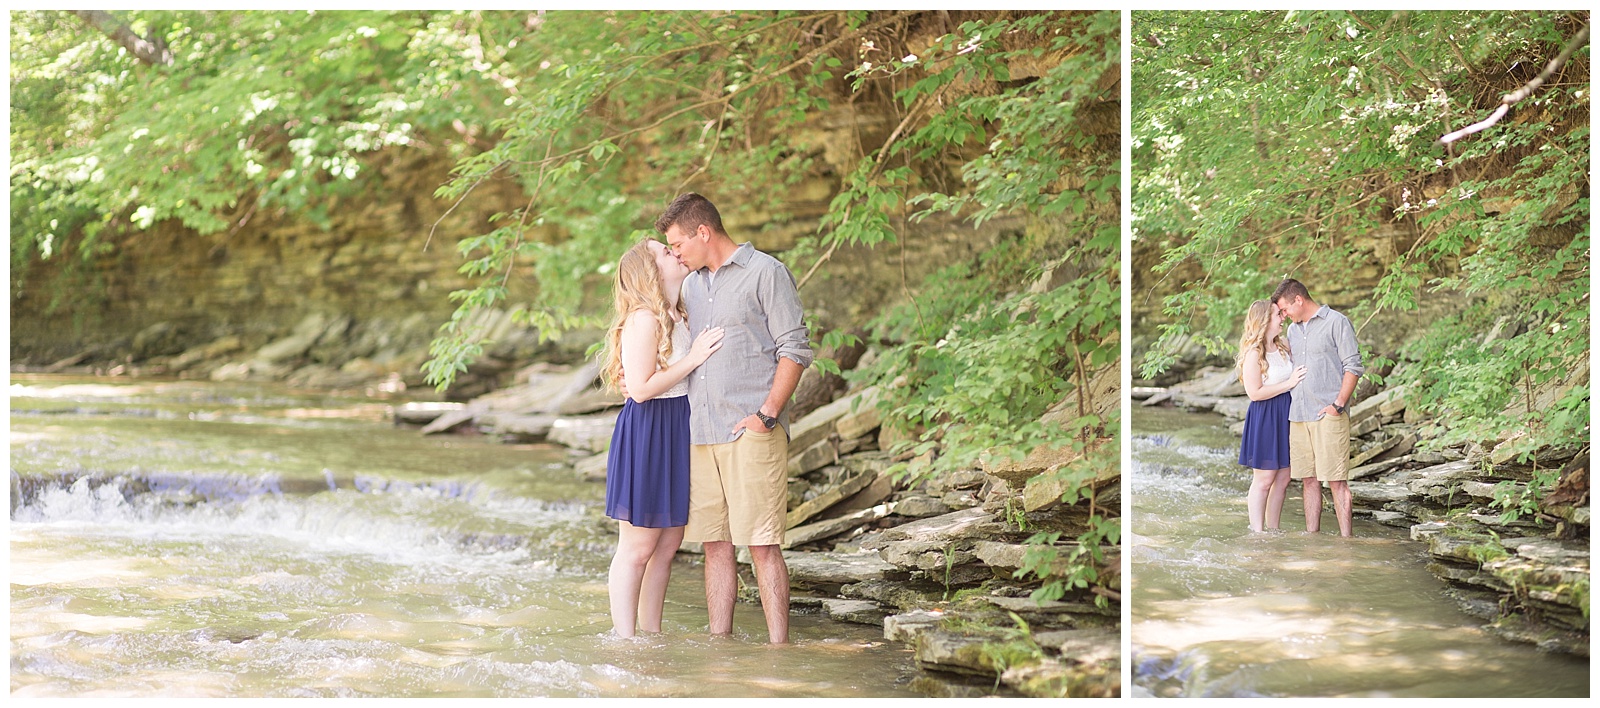 Outdoor Engagement Session | Monica Brown Photography | monicabrownphoto.com